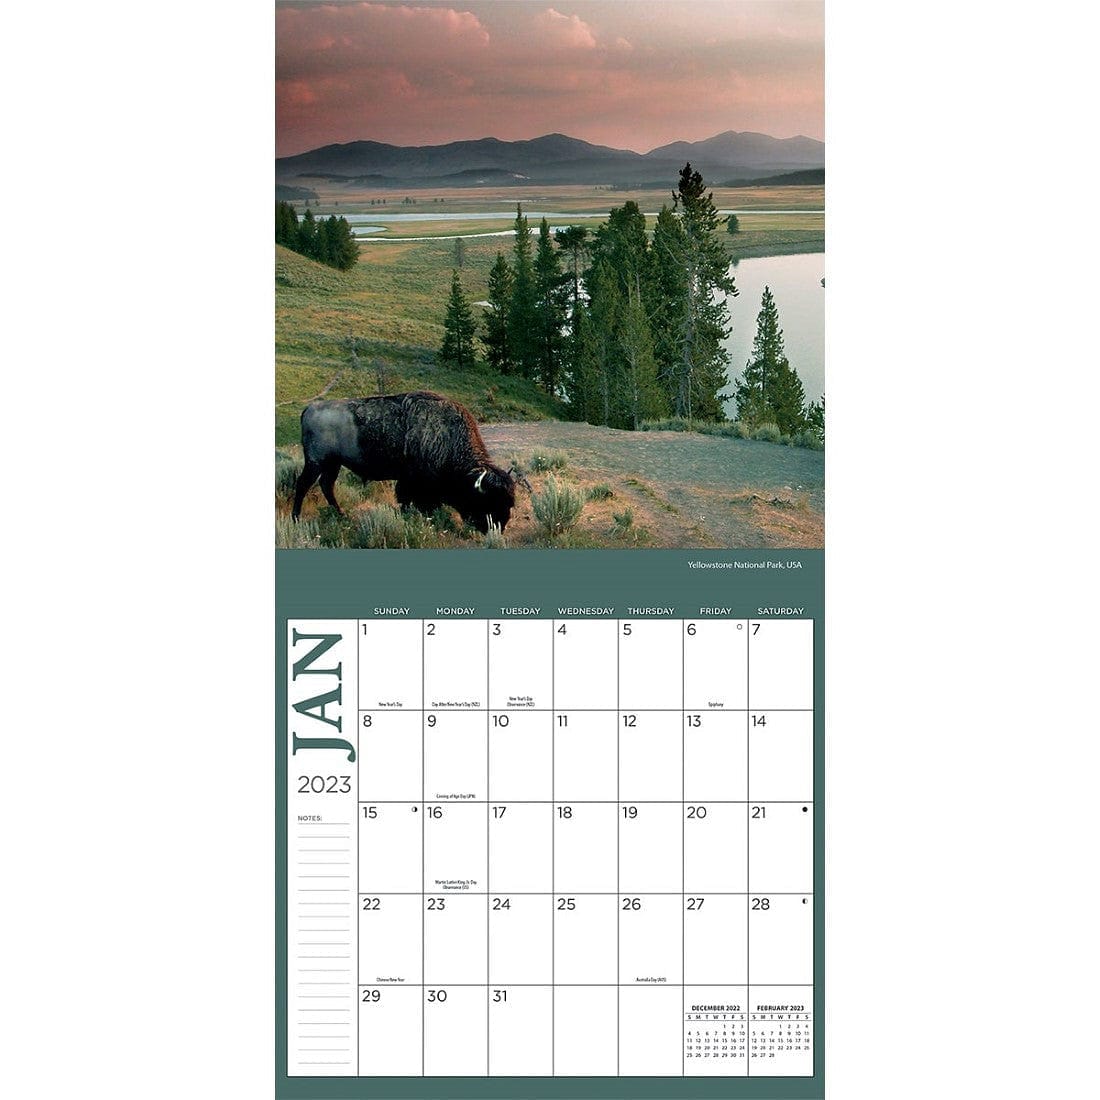 National Parks 2023 Wall Calendar - Shelburne Country Store